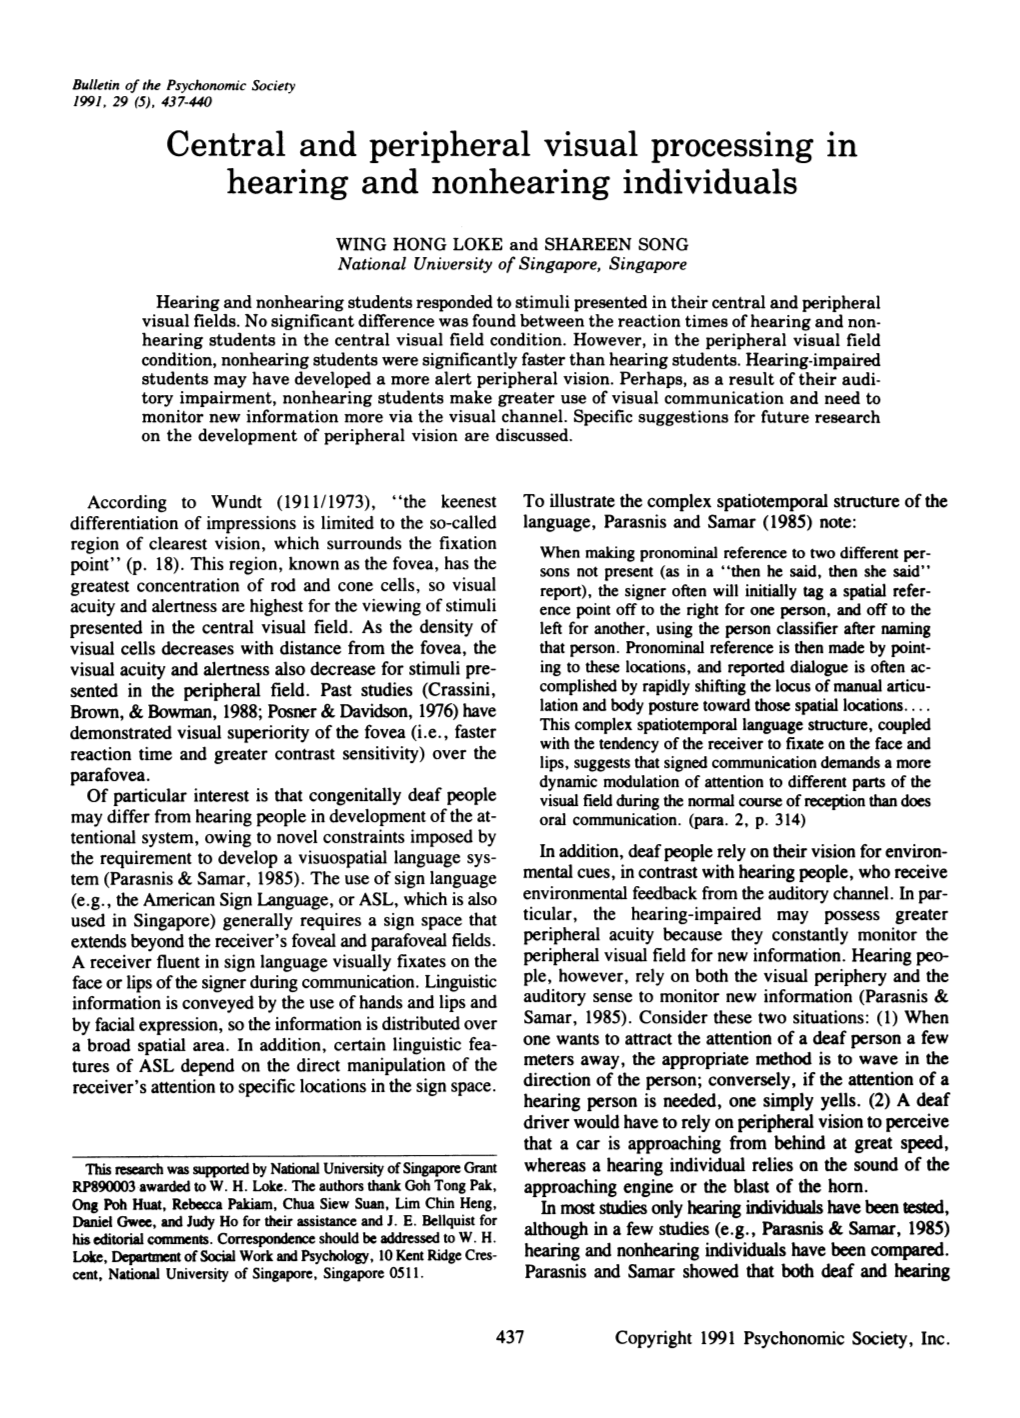 Central and Peripheral Visual Processing in Hearing and Nonhearing Individuals